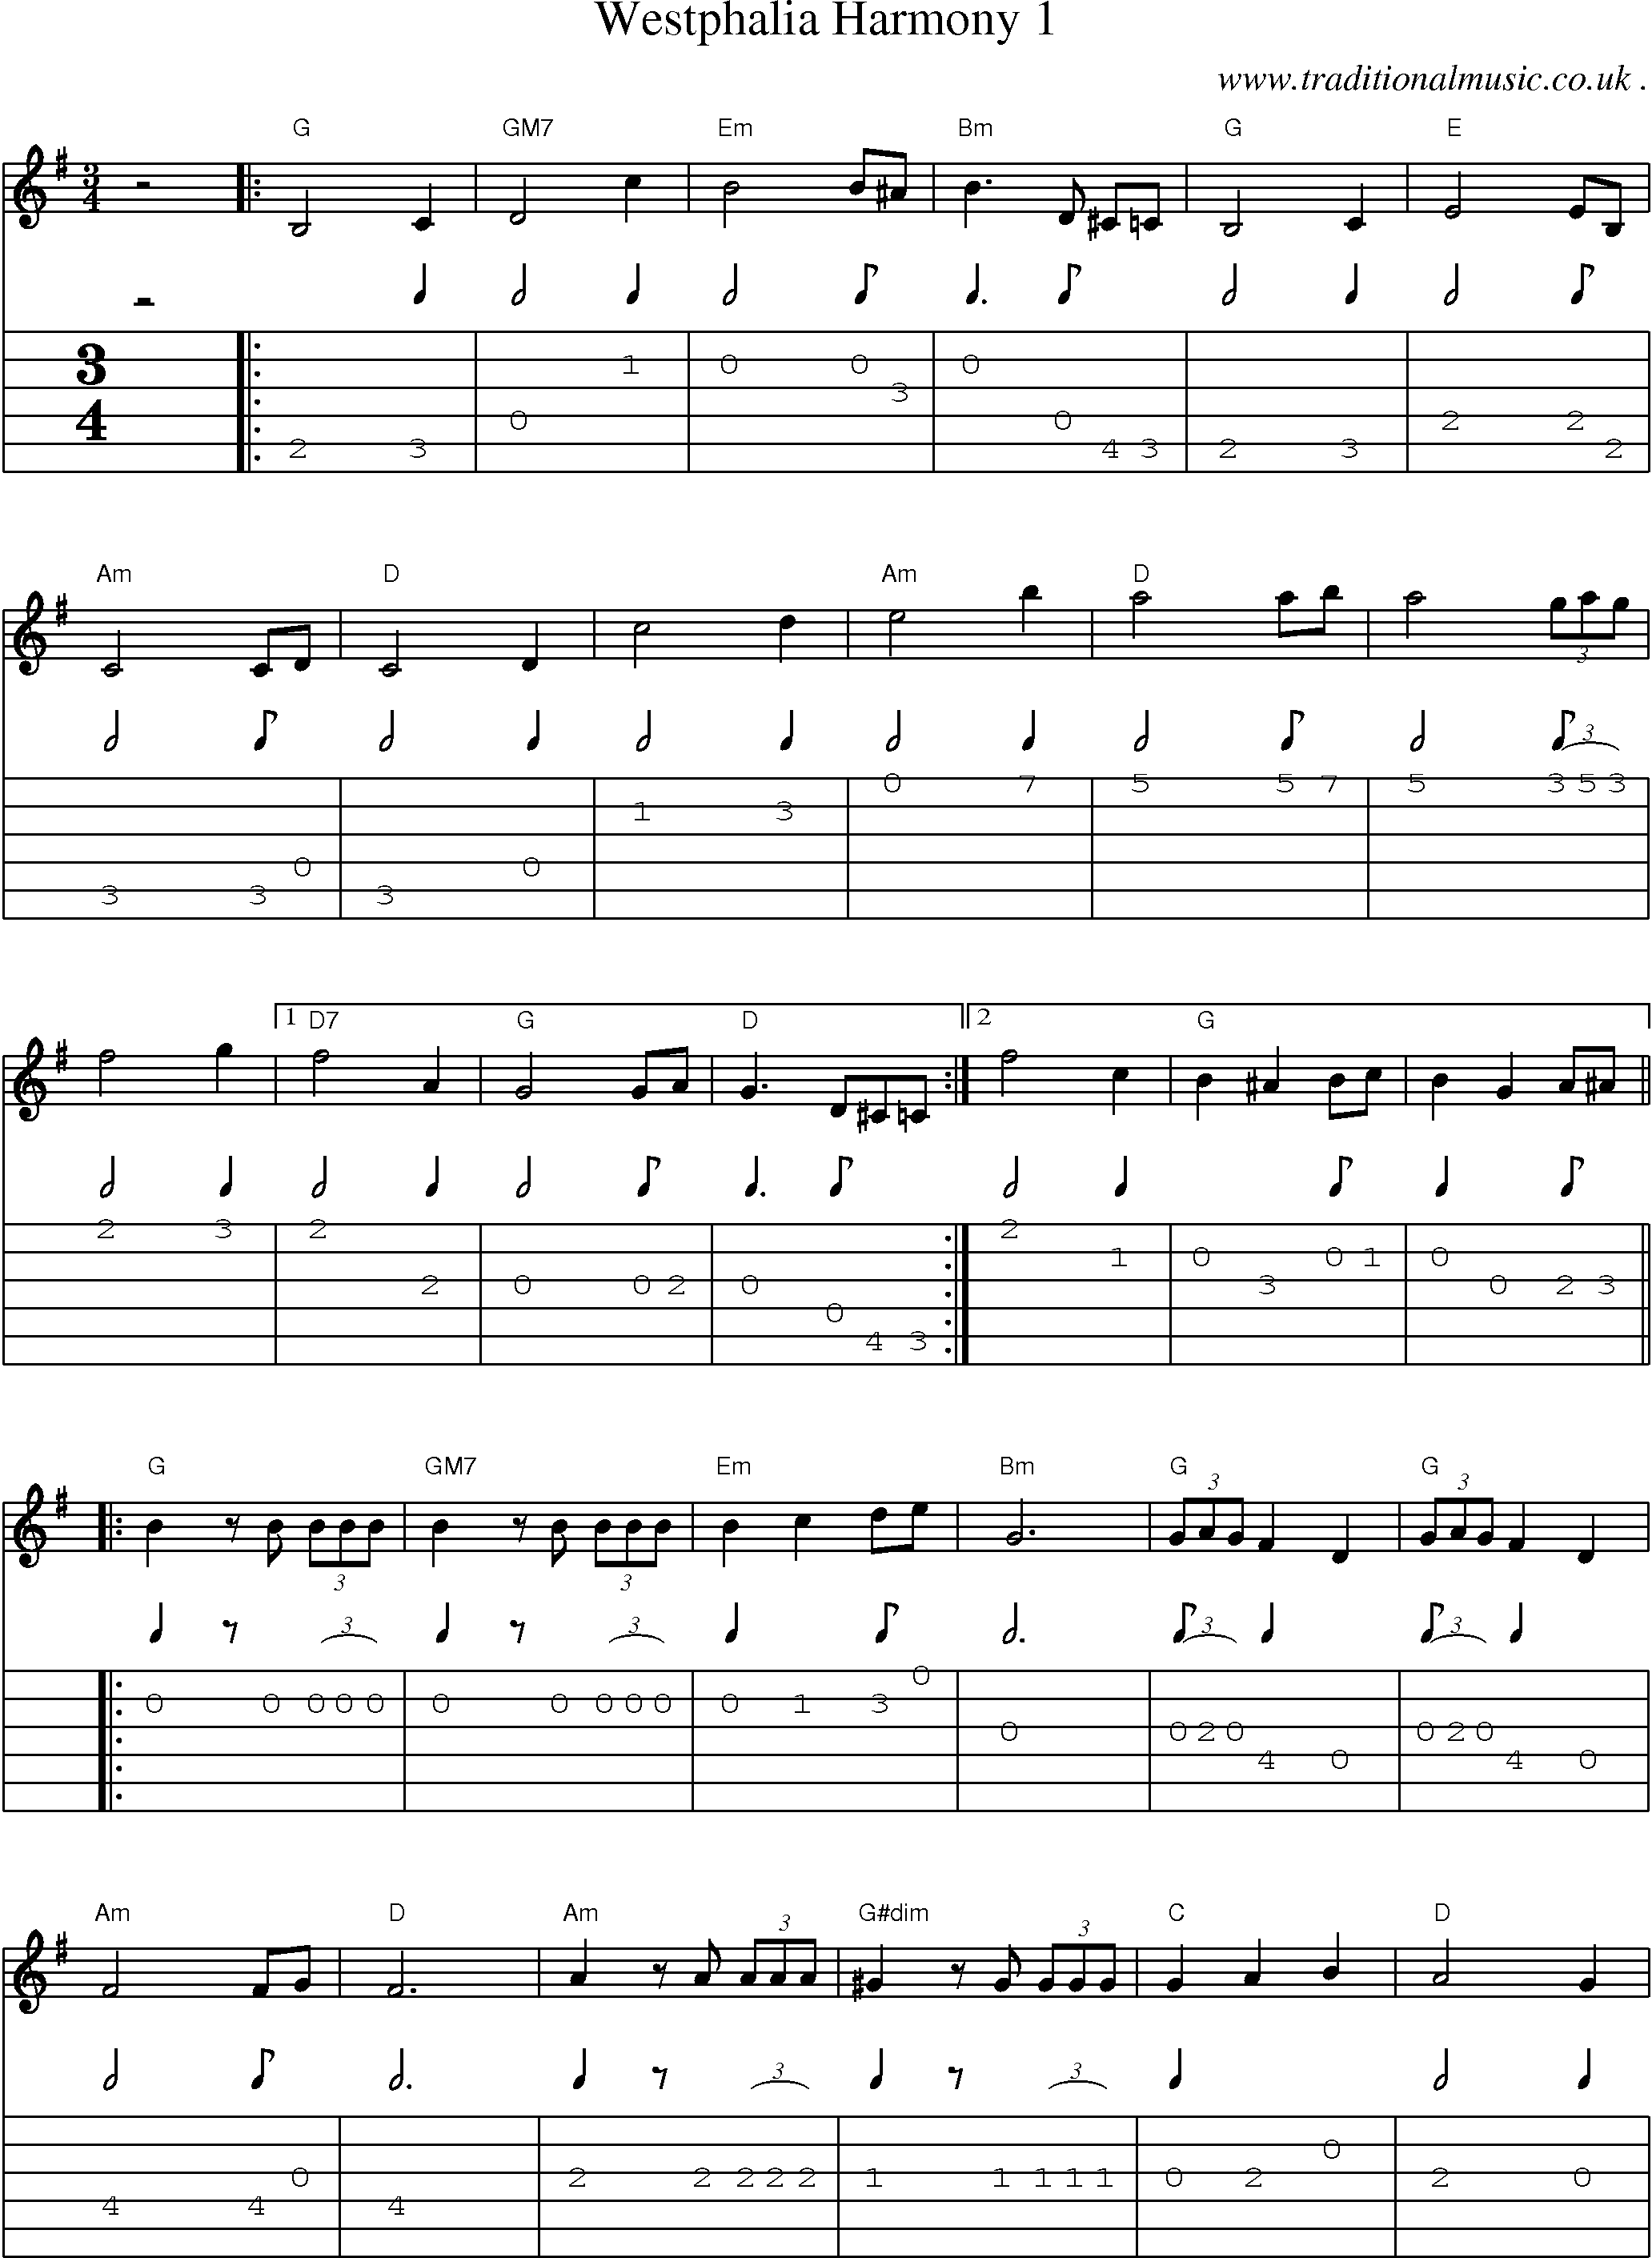 Music Score and Guitar Tabs for Westphalia Harmony 1